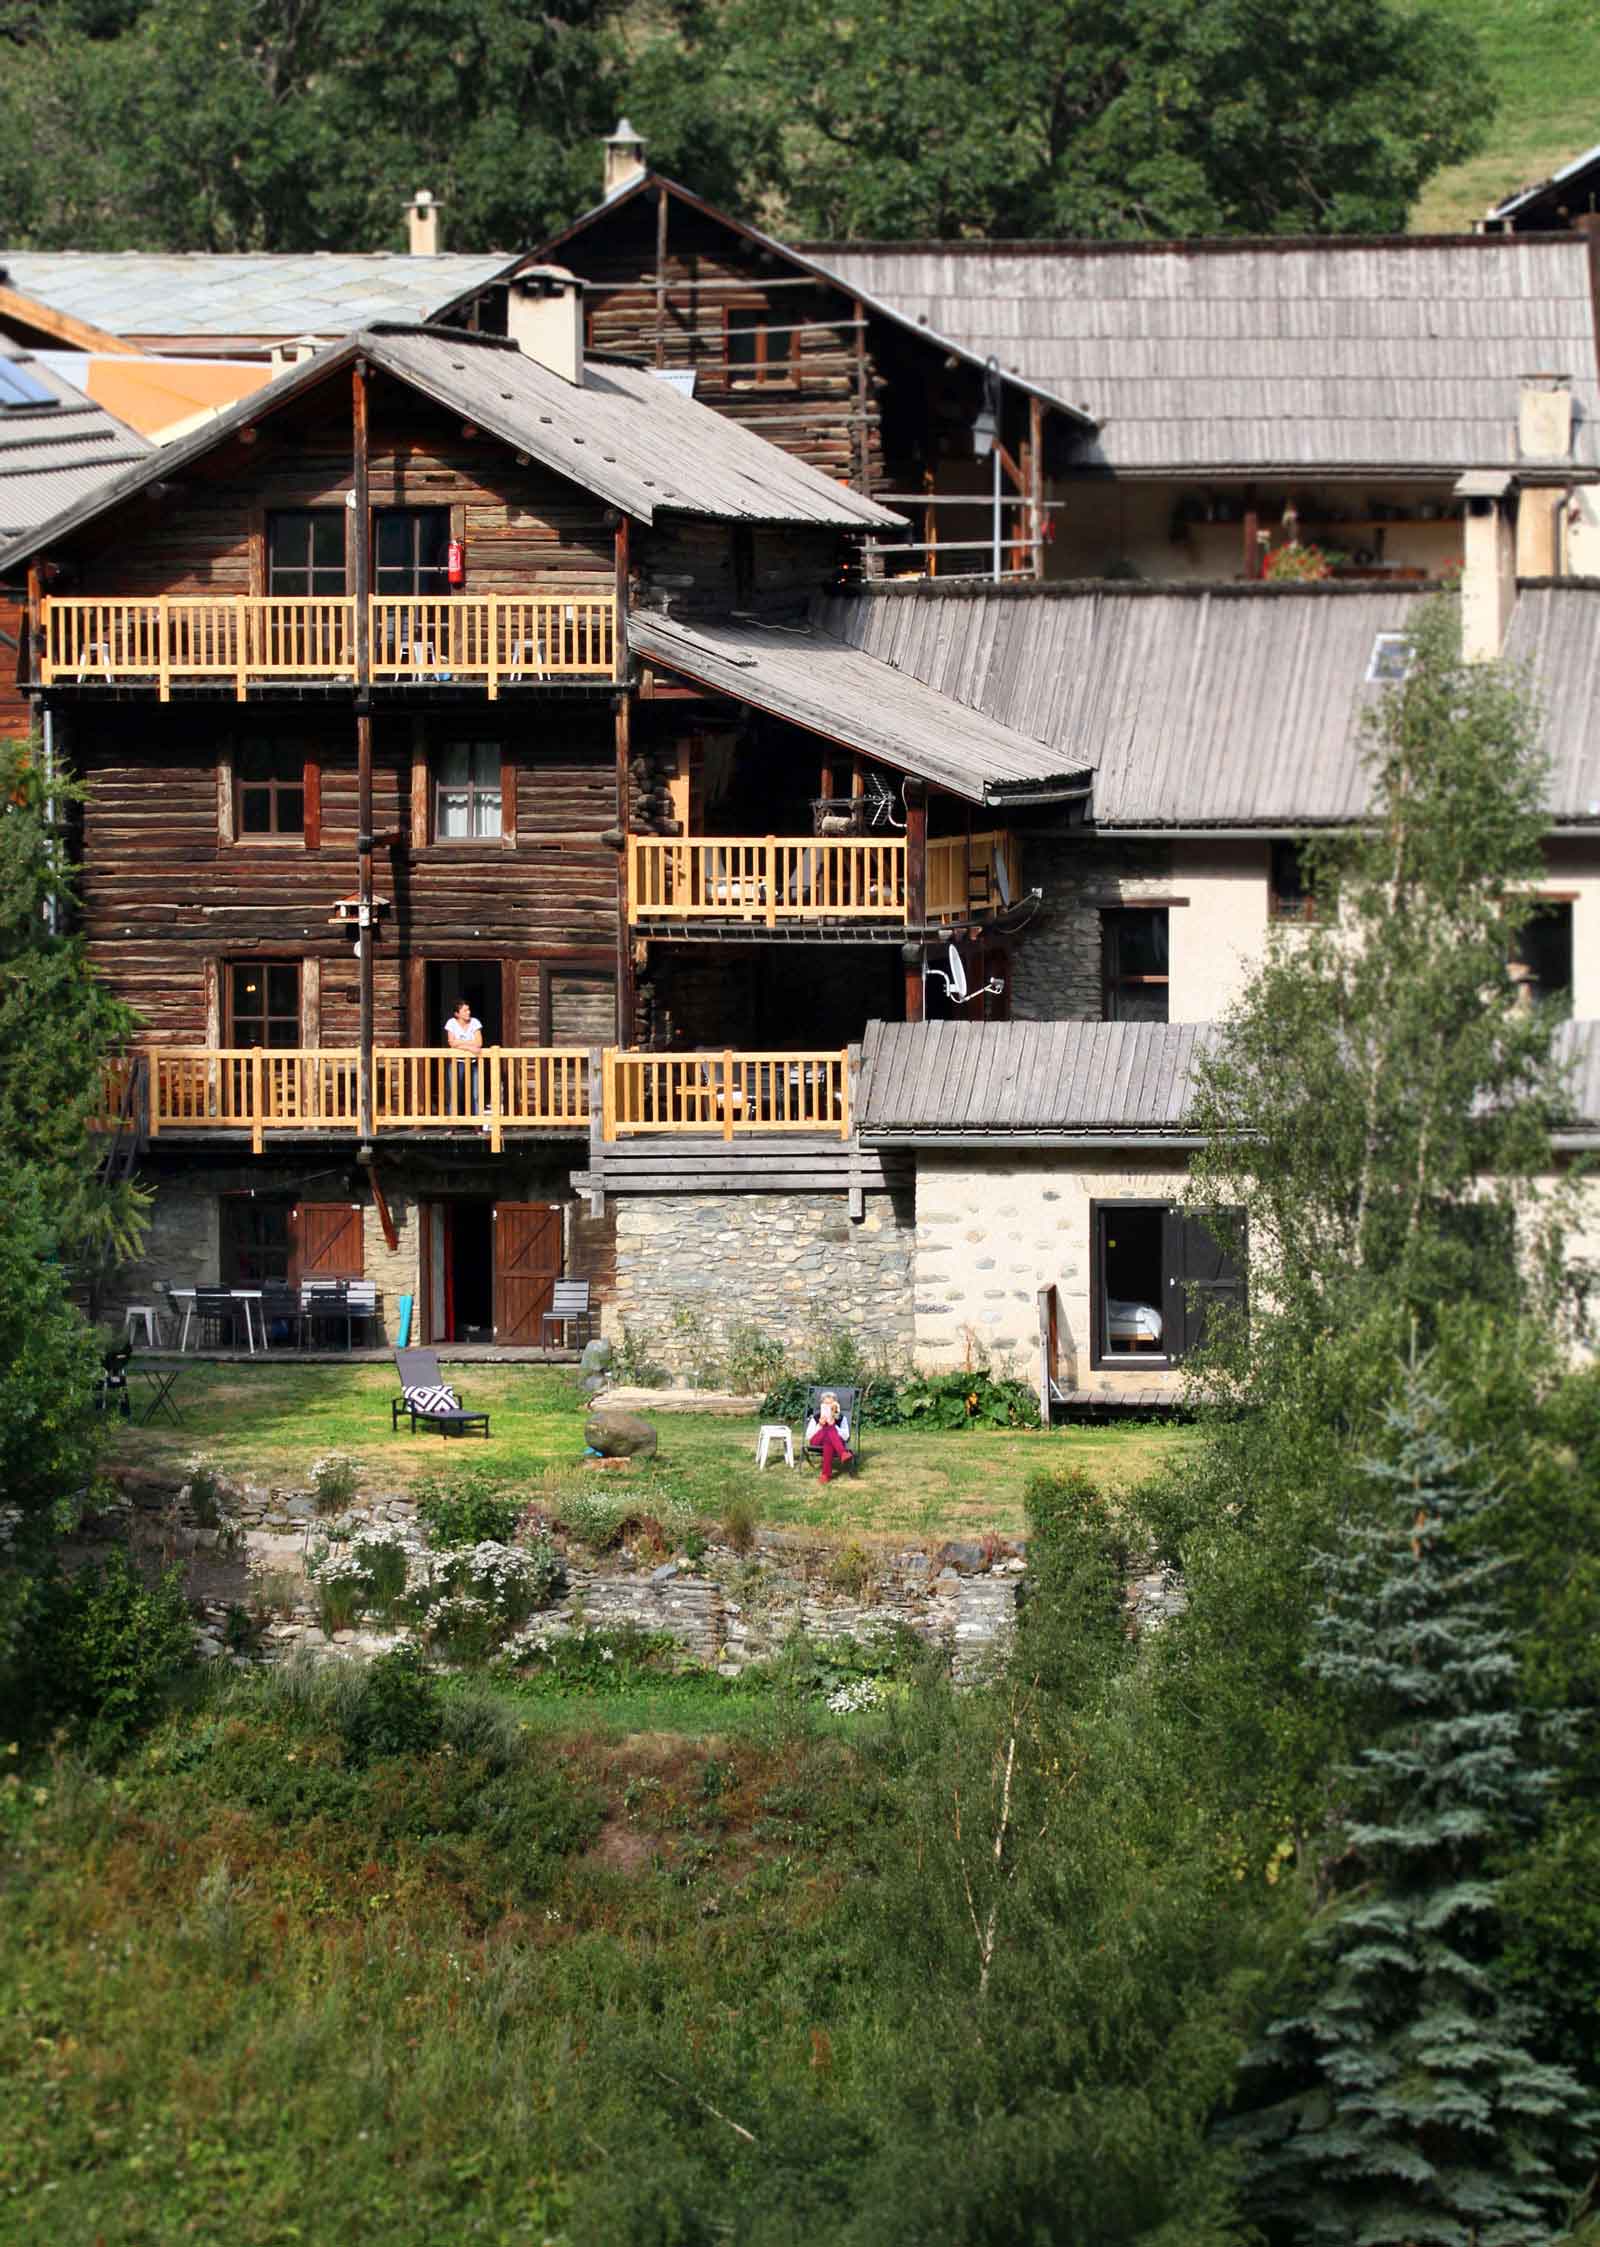 House emme queyras gite charm rental apartment seasonal decoration interior high end mountain chalet winter summer molines-en-queyras vacations ski hiking snowshoeing nature high alps authentic fuste garden quiet renovated ecogite ecologic kayak rafting fishing quality group gite